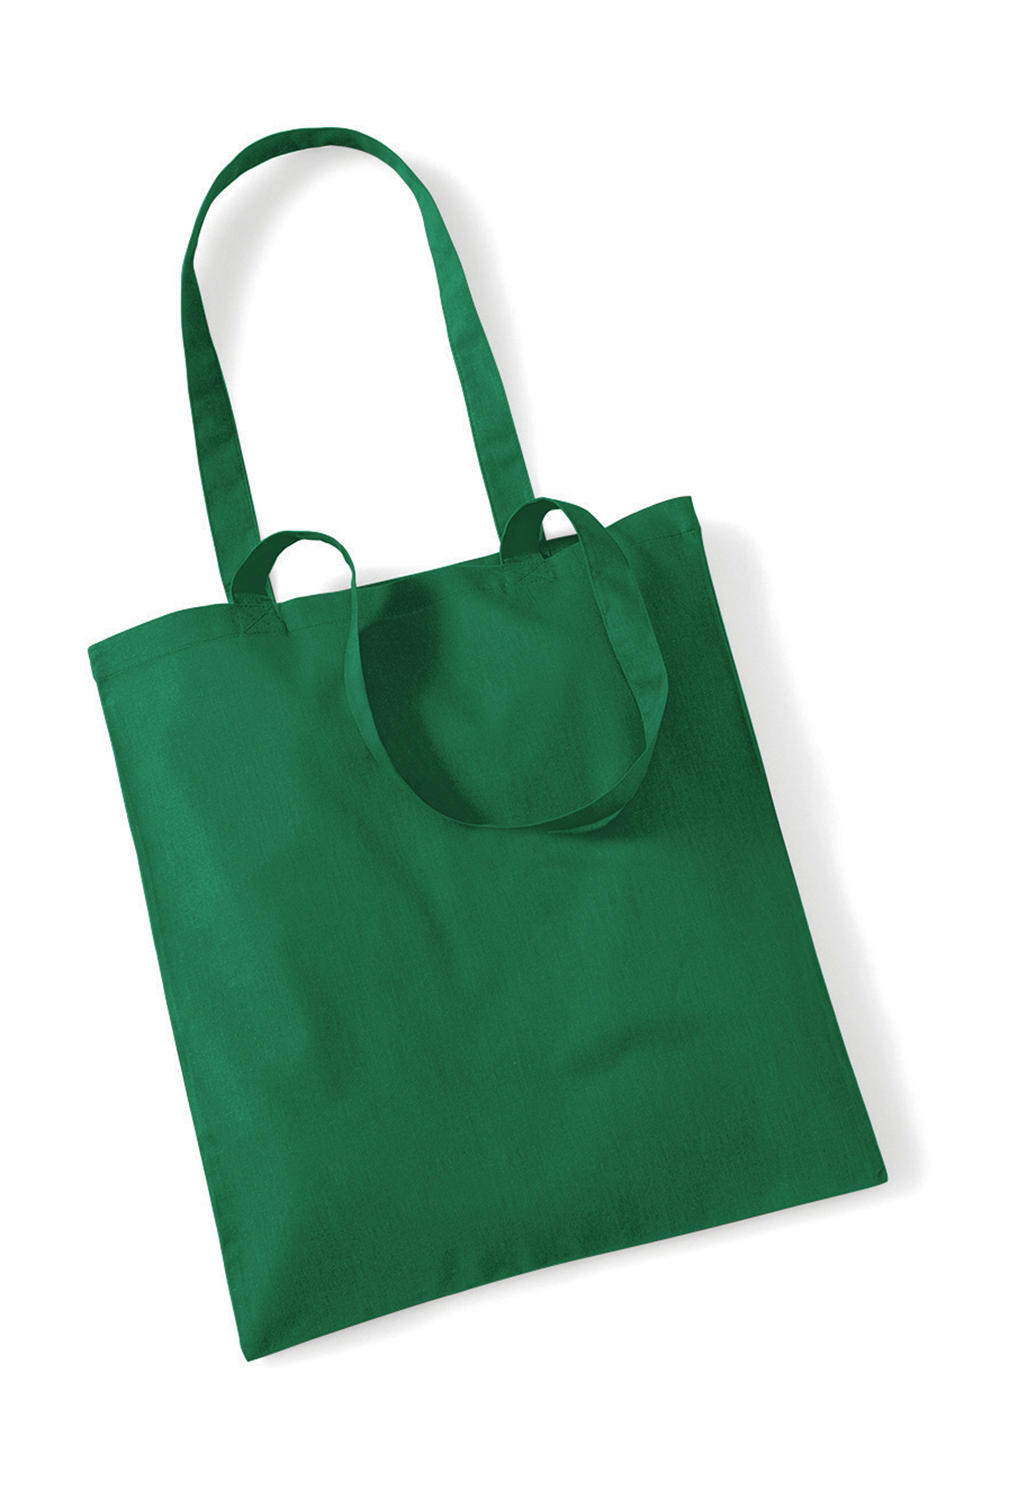  Bag for Life - Long Handles in Farbe Kelly Green